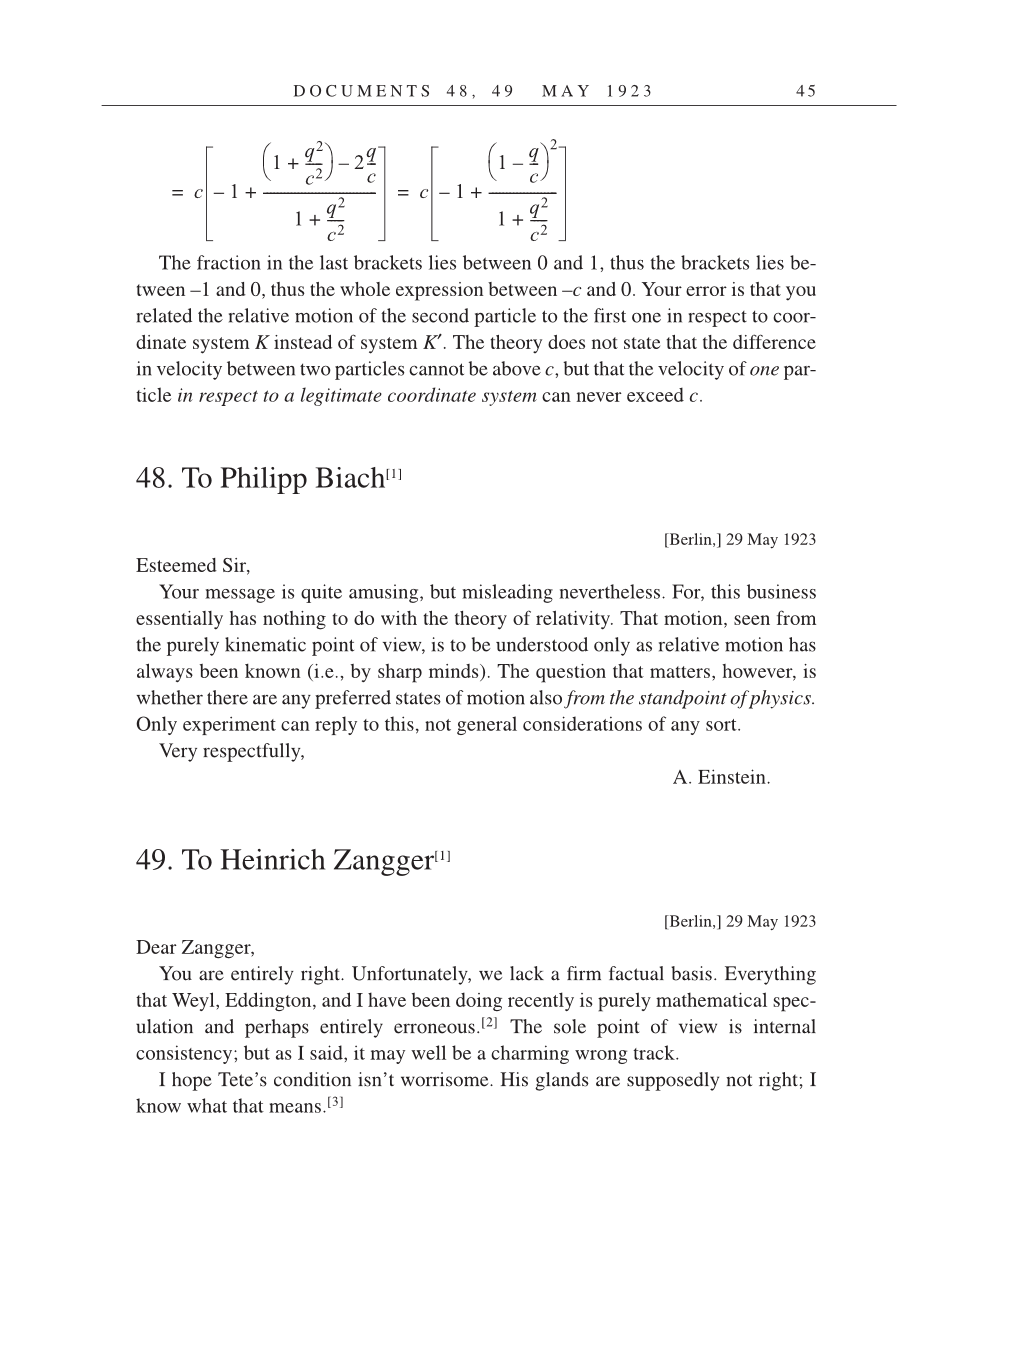 Volume 14: The Berlin Years: Writings & Correspondence, April 1923-May 1925 (English Translation Supplement) page 45